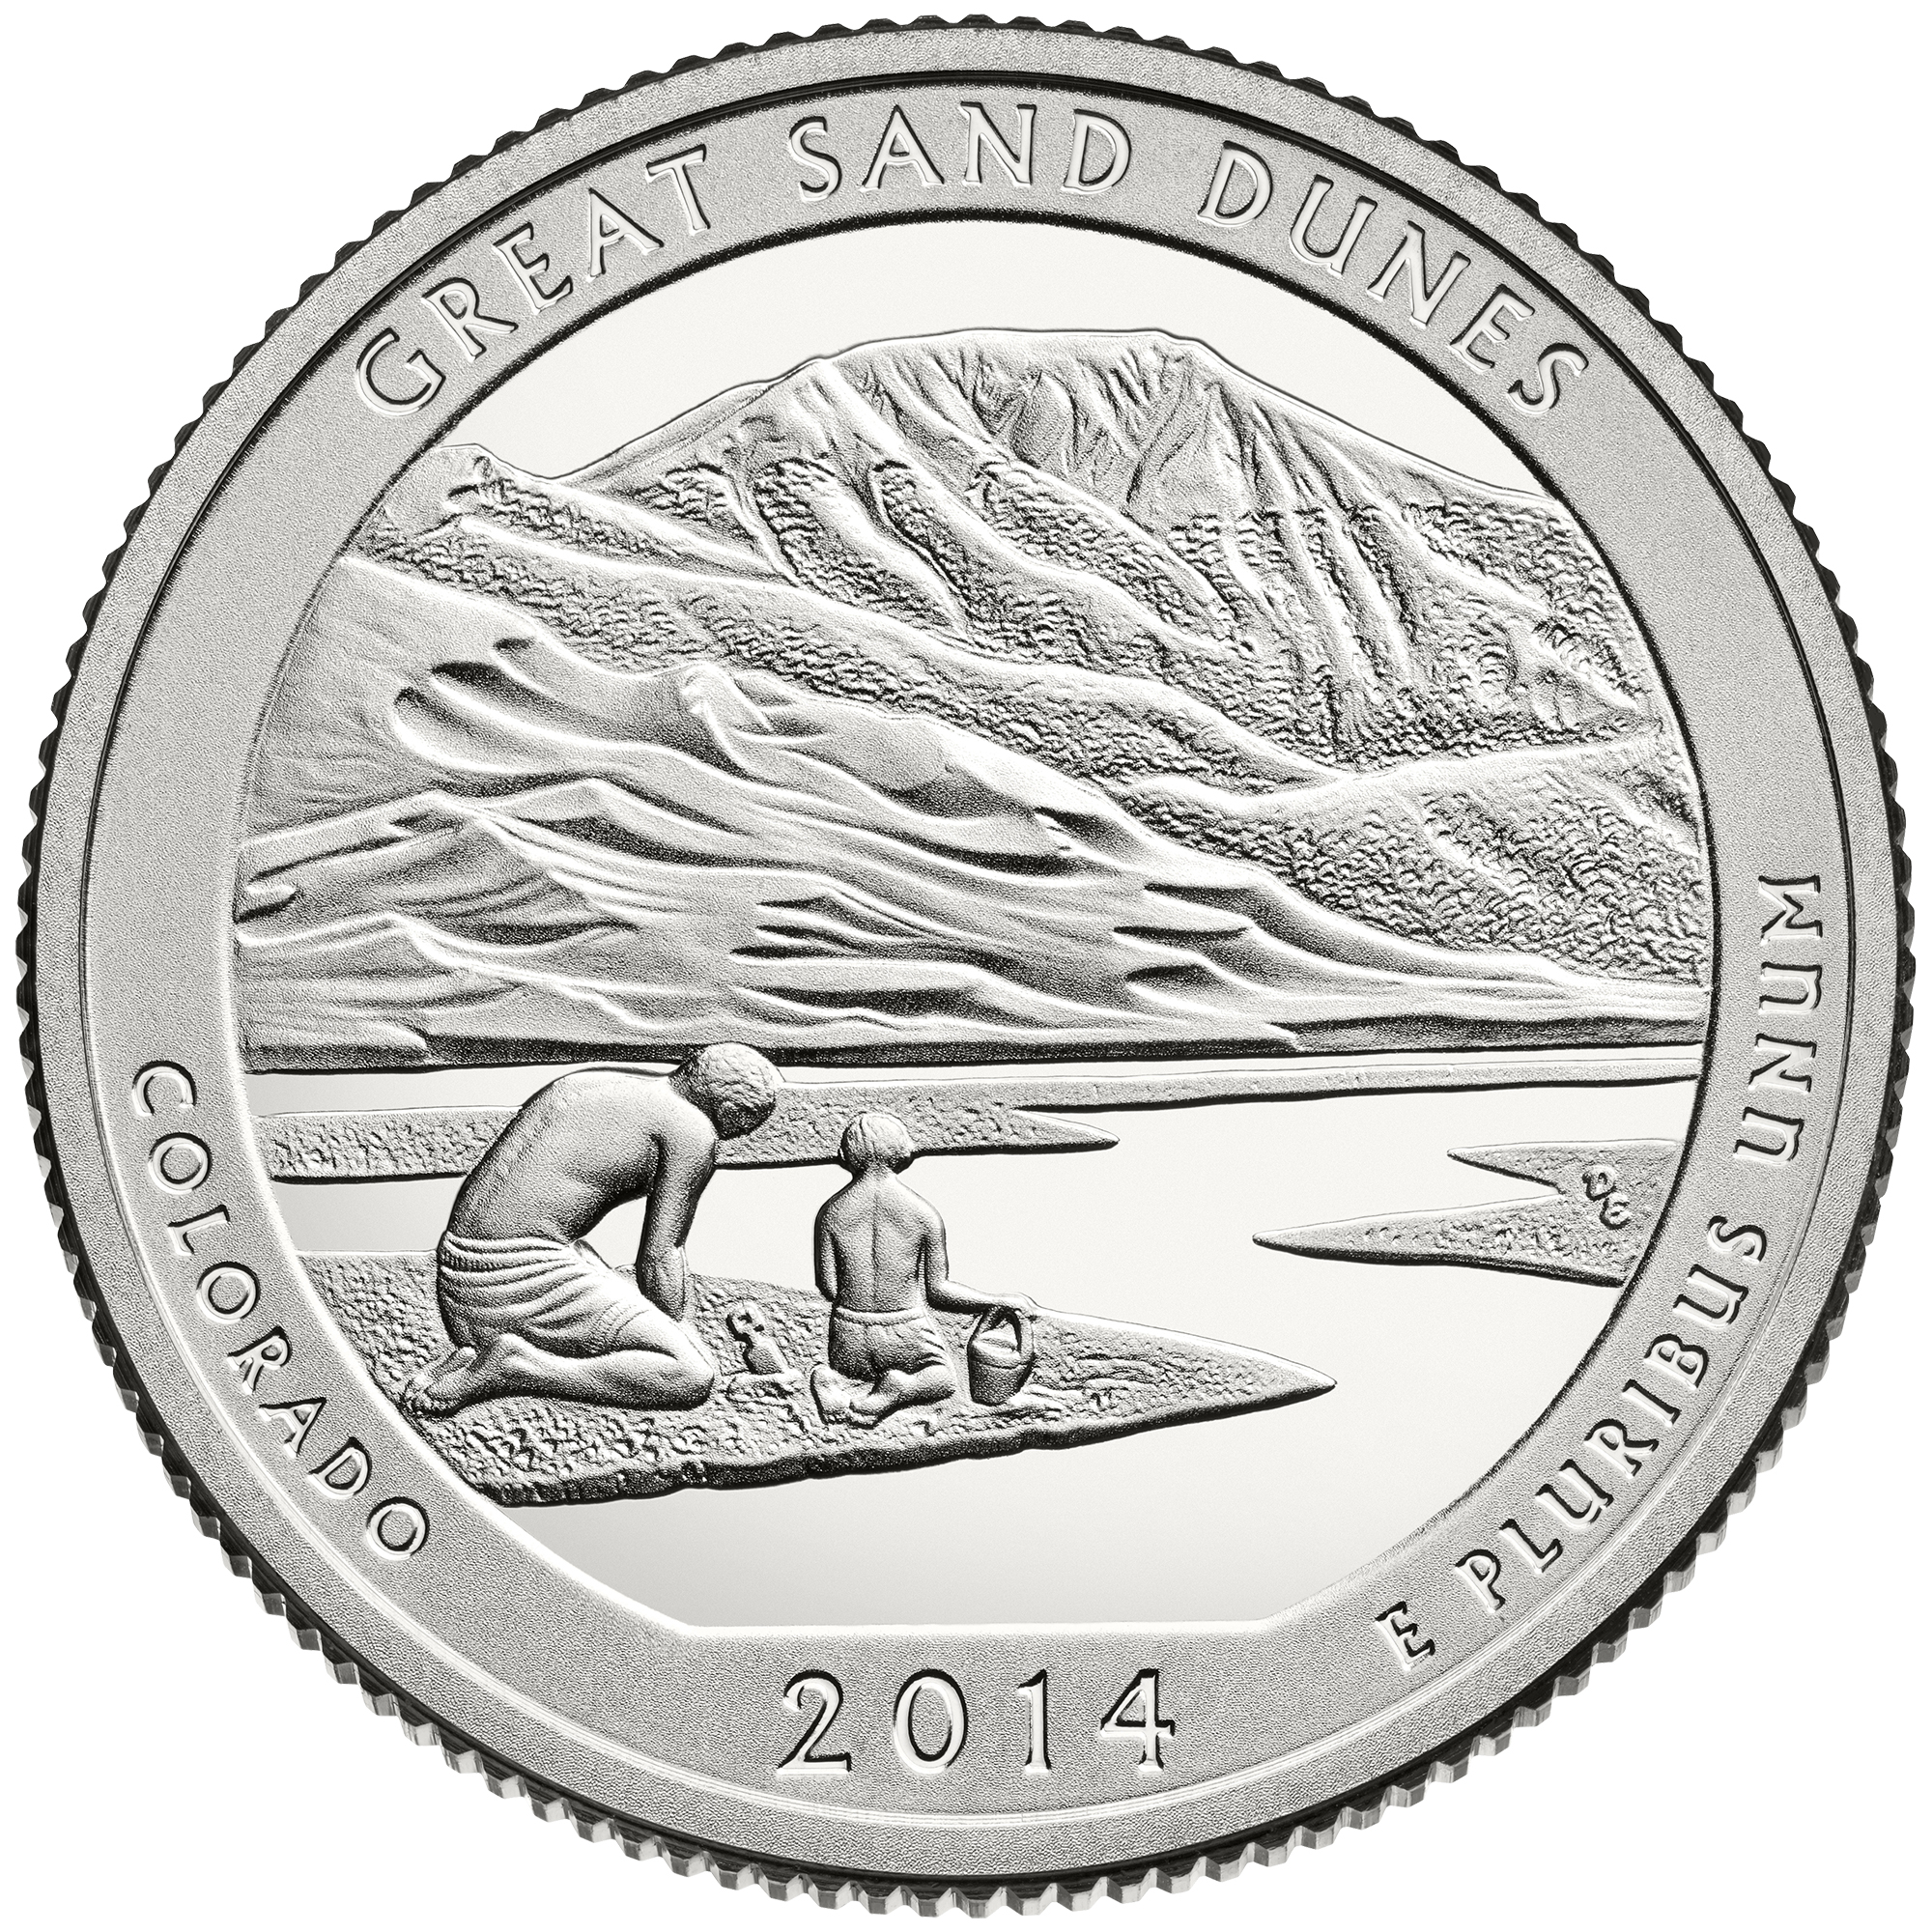 2014-ATB-Proof-Great-Sand-Dunes-rev-2000